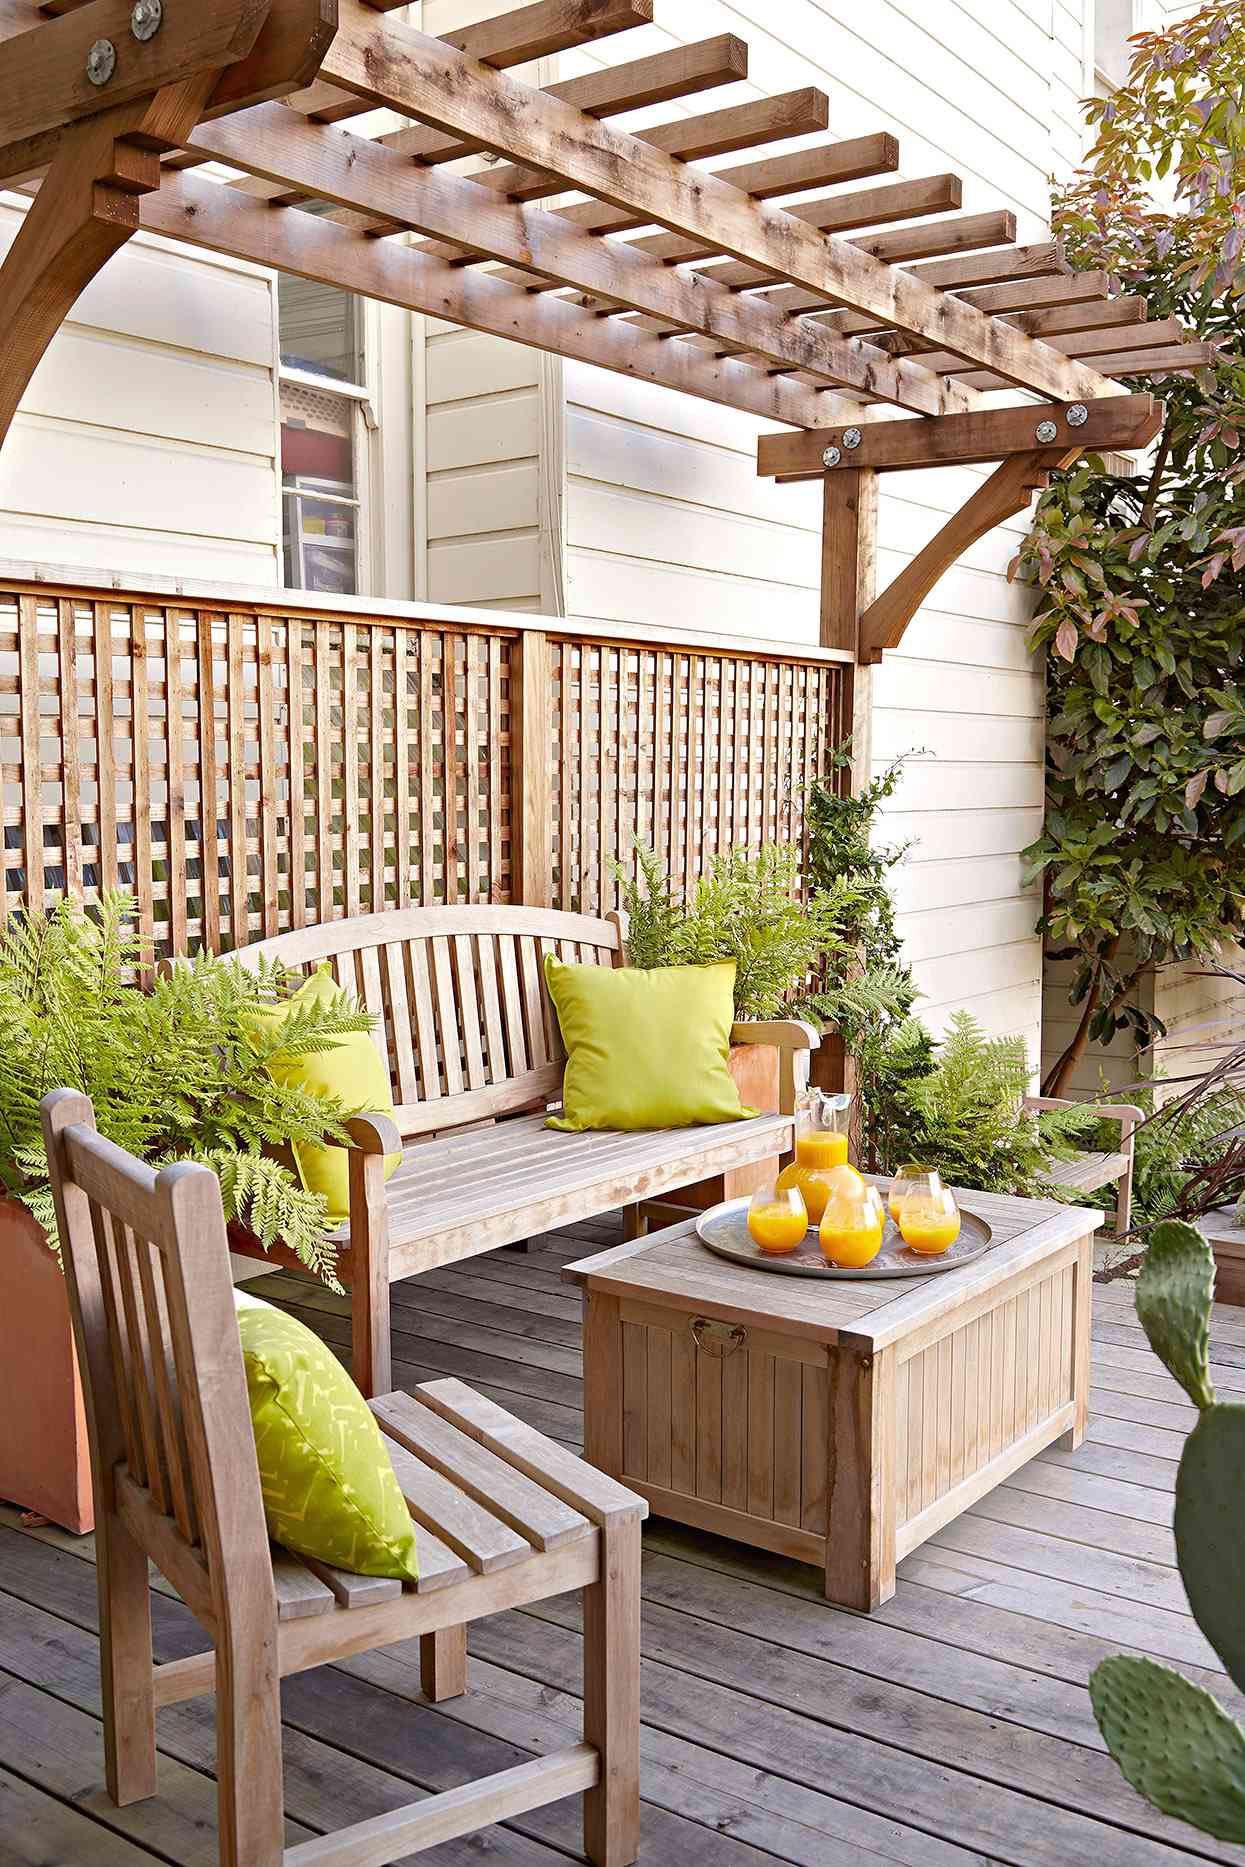 patio furniture and green cushions on deck beneath arbor